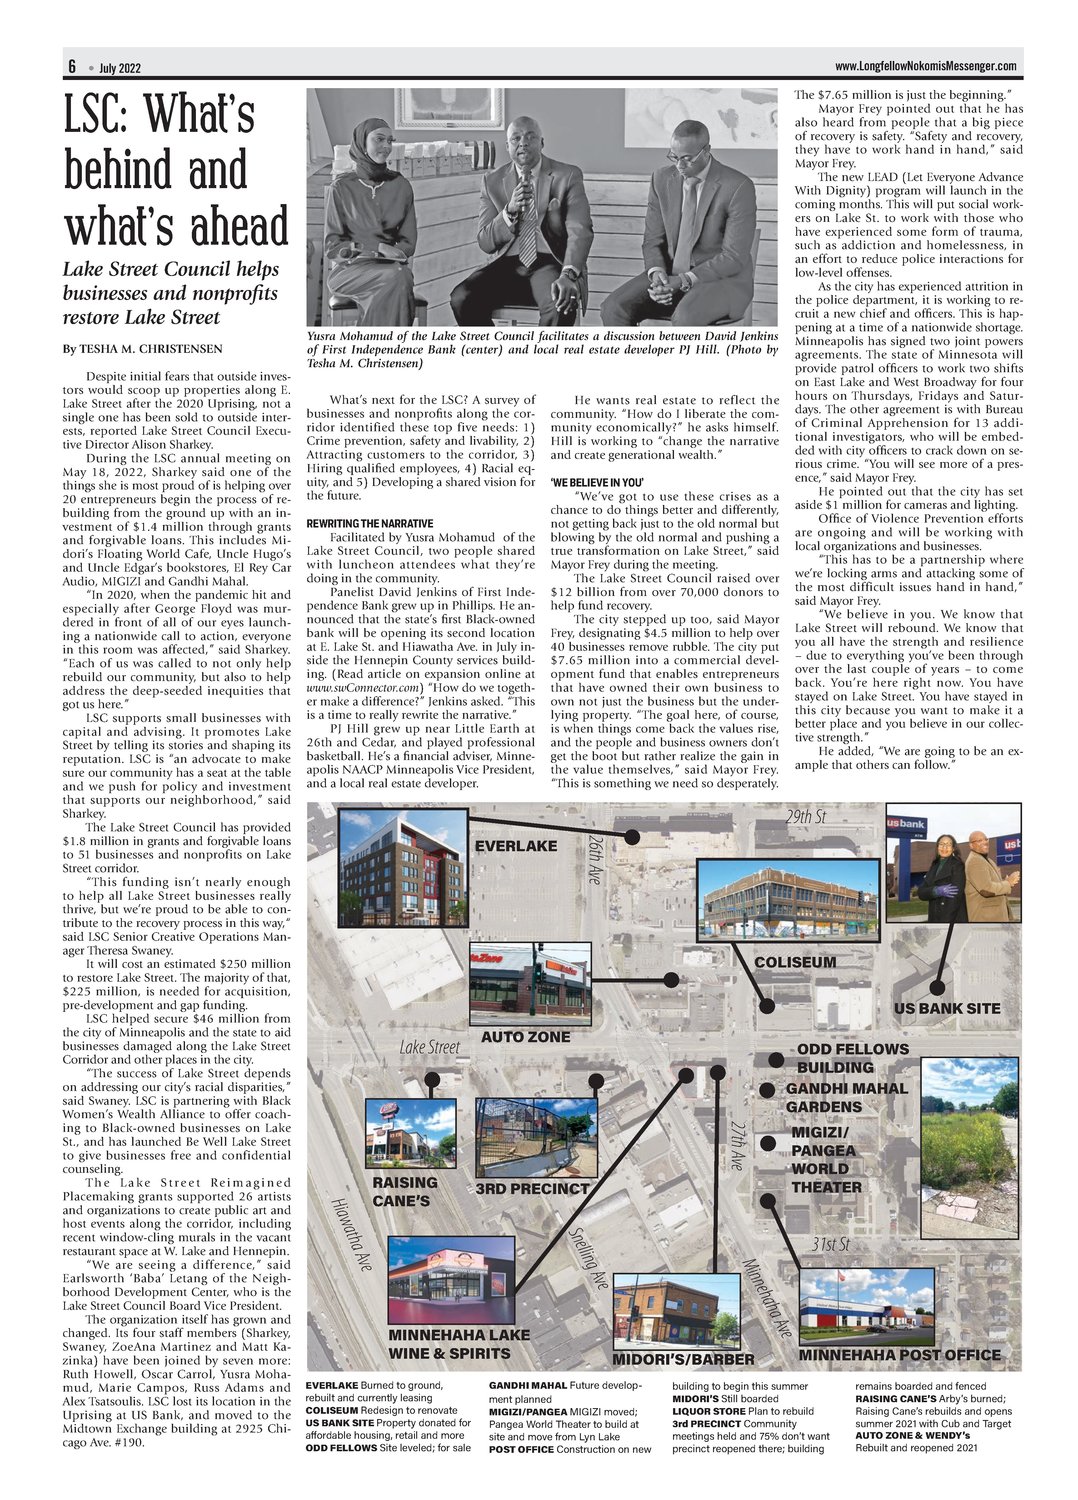 Second Place, Use of Information Graphics and Graphic Illustrations - Tesha M. Christensen, “Lake Street 2 years later,” Longfellow Nokomis Messenger, July 2022. Judge’s comment: Nice pictures